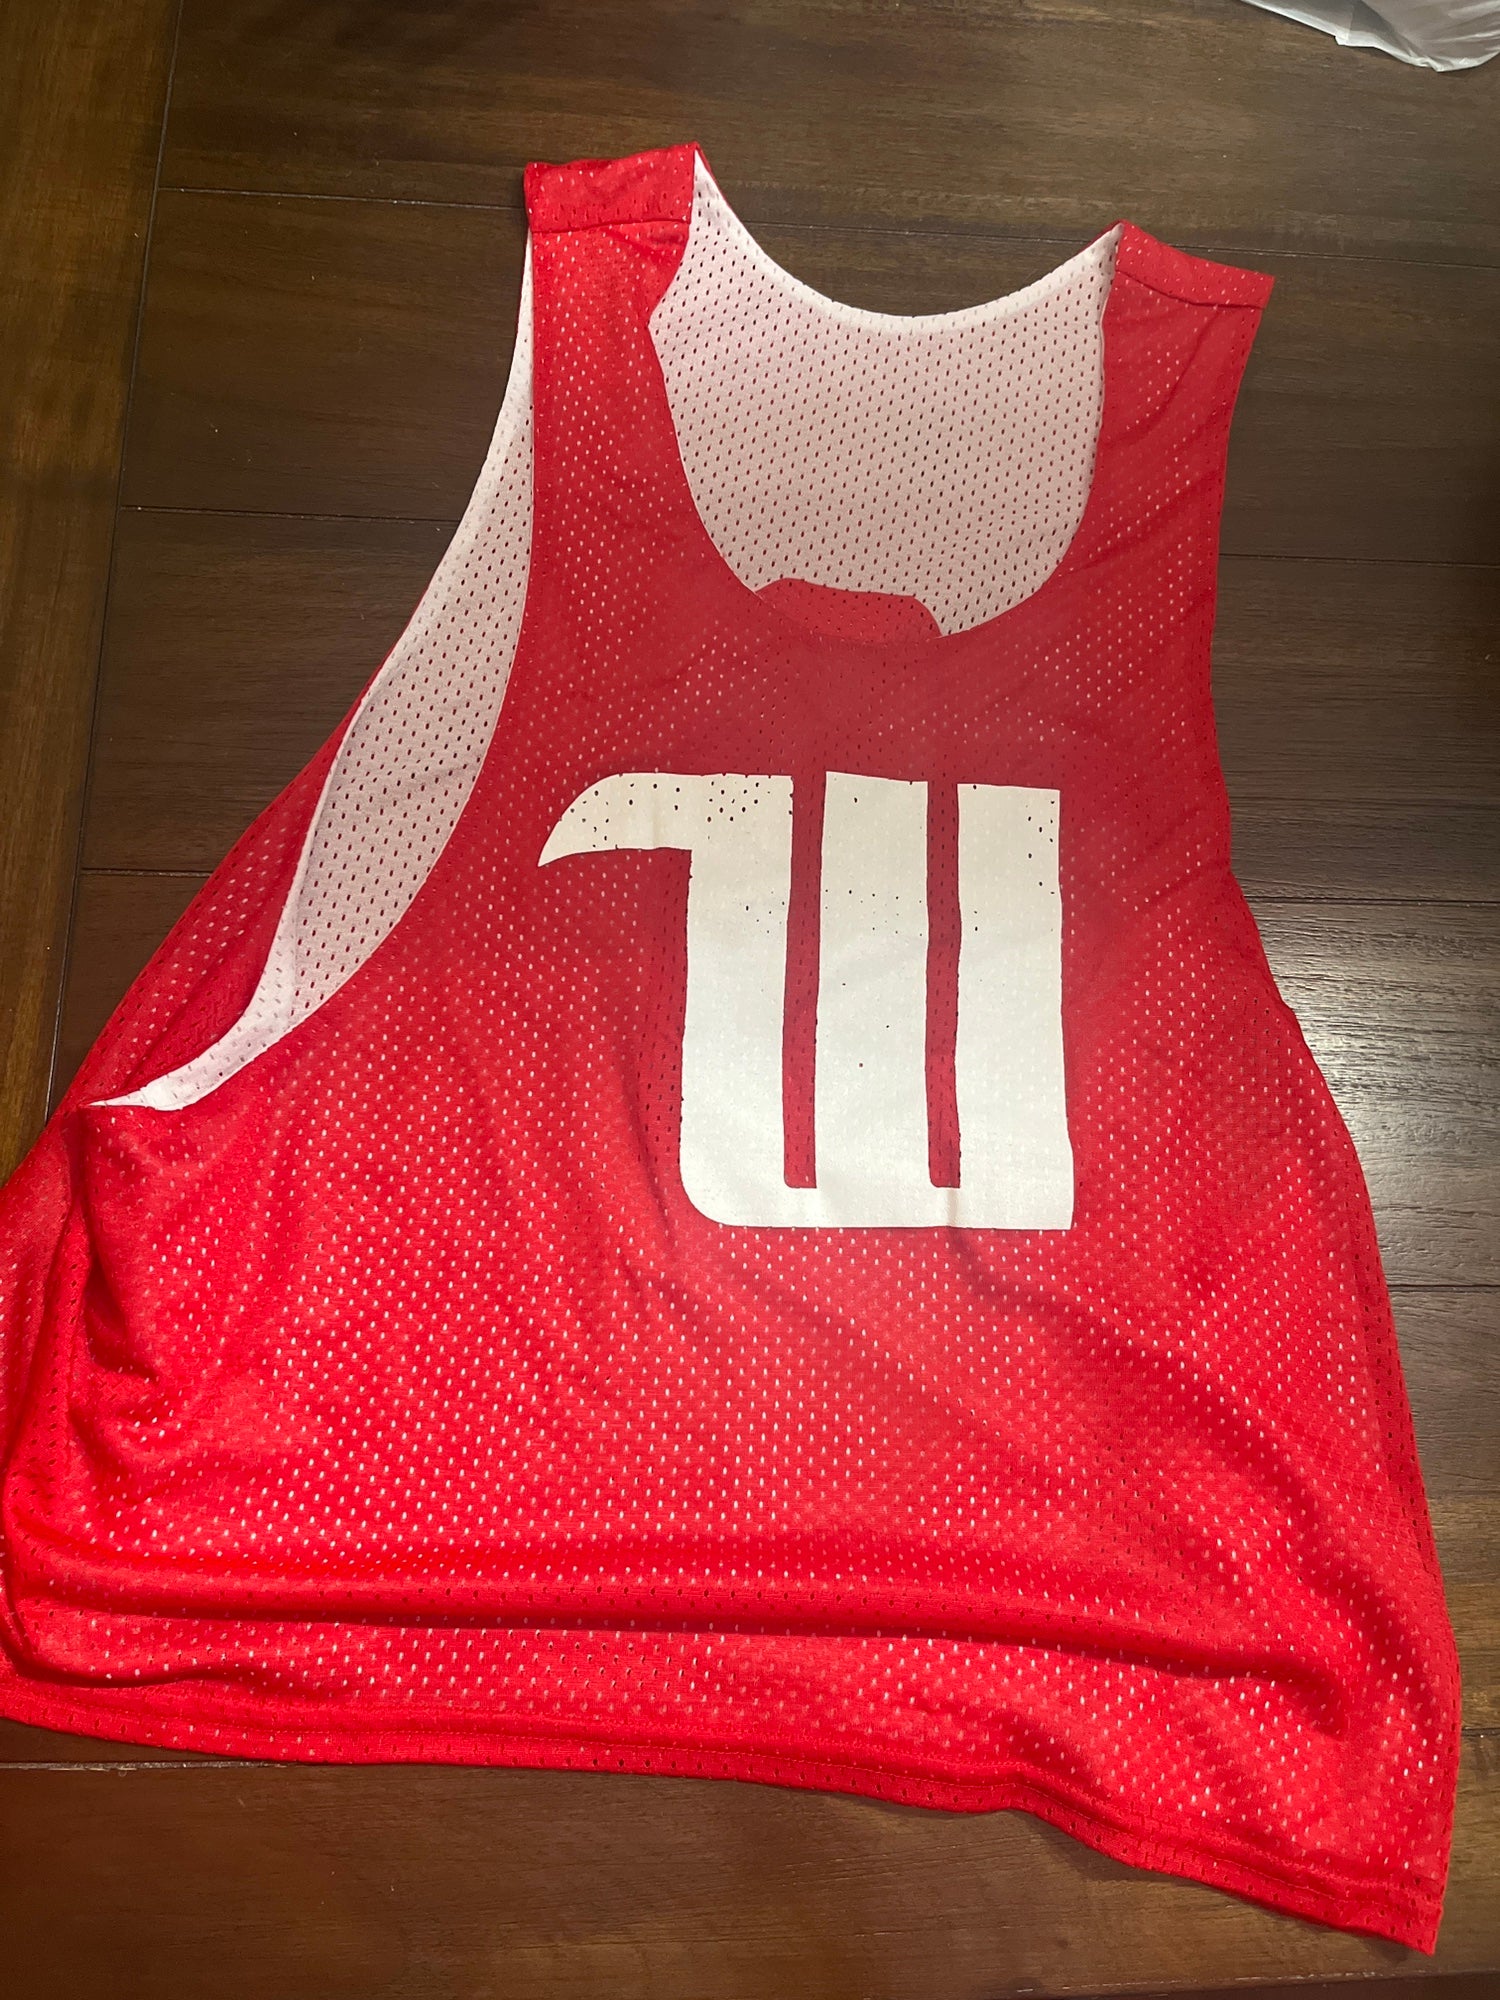 Factory Lacrosse Reversible Baltimore Bullets Themed Jersey | SidelineSwap